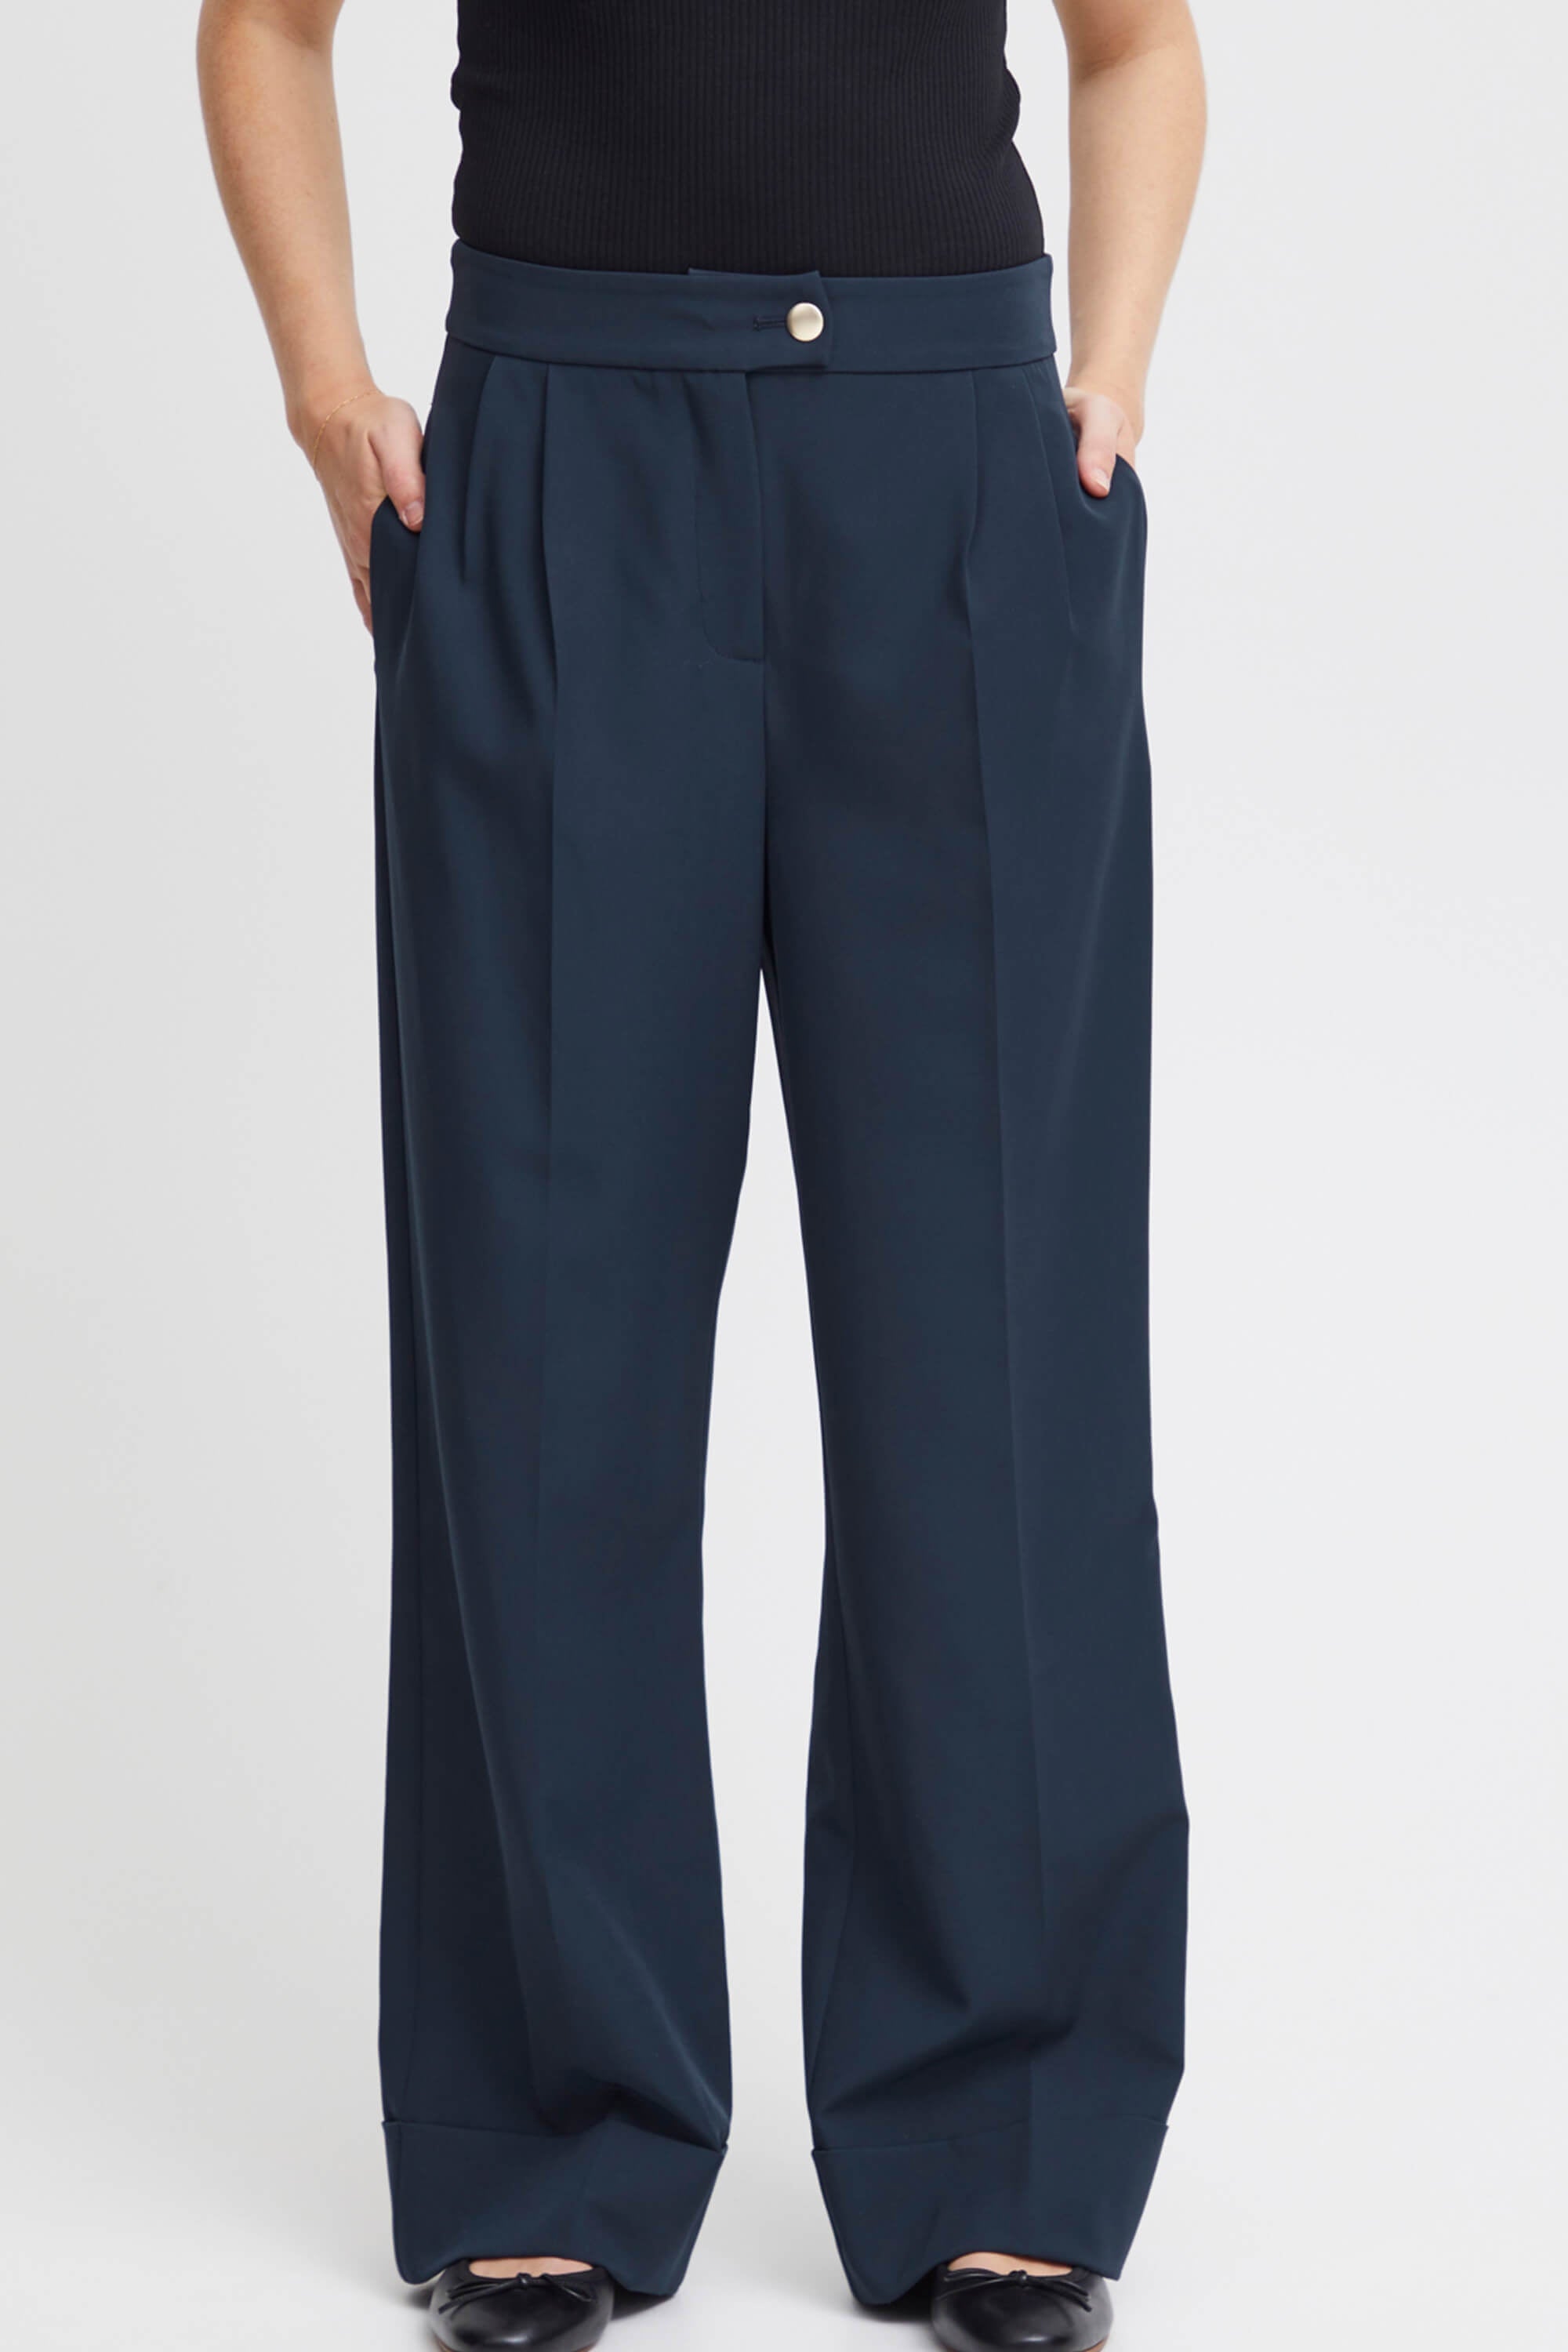 Ichi Lexi Trousers Total Eclipse